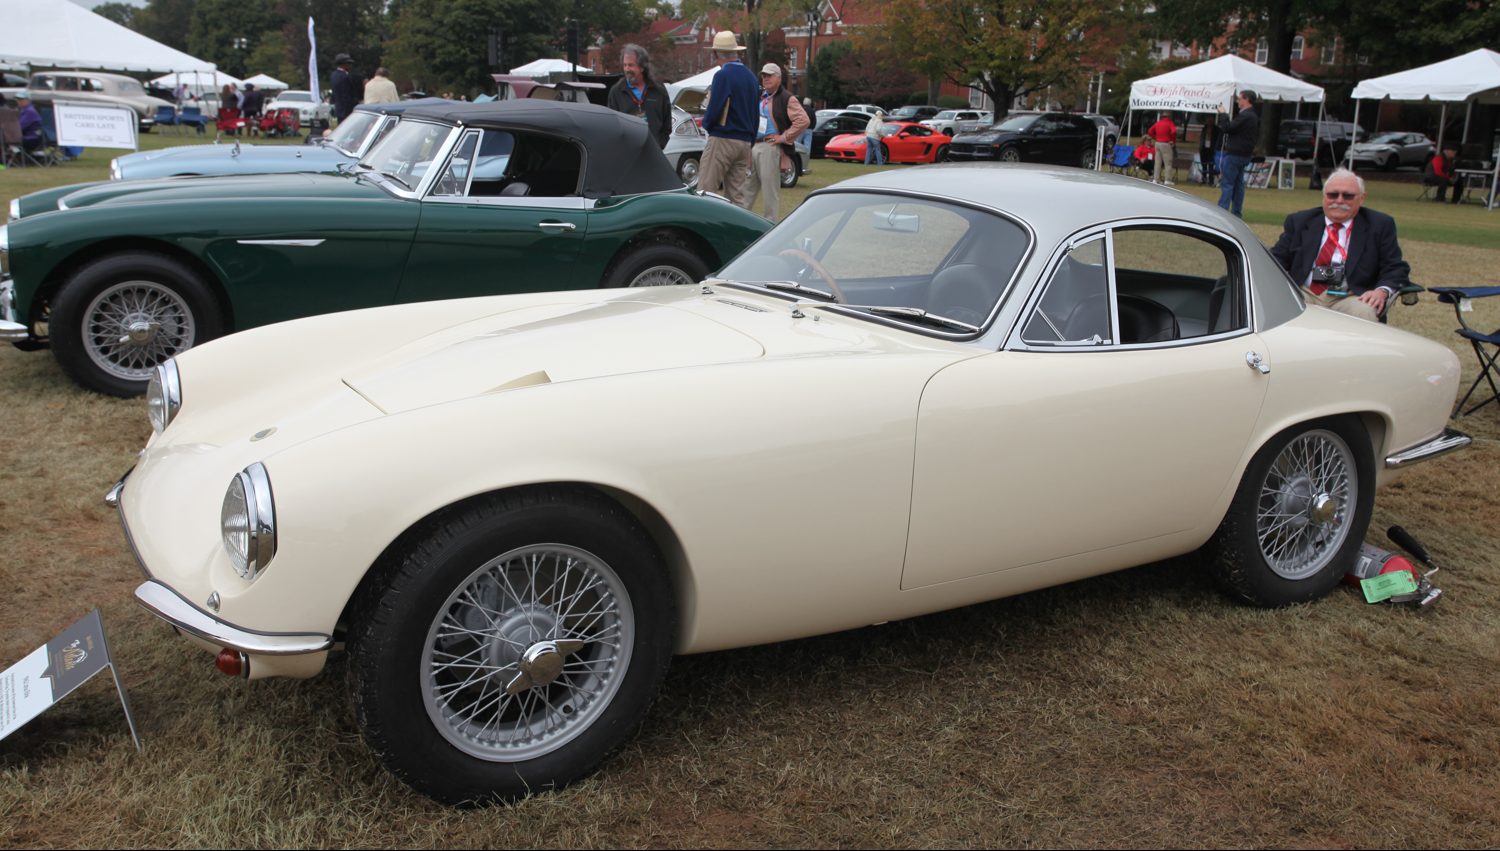 So pretty - watch for a profile of this lovely Lotus Elite in a future issue. 